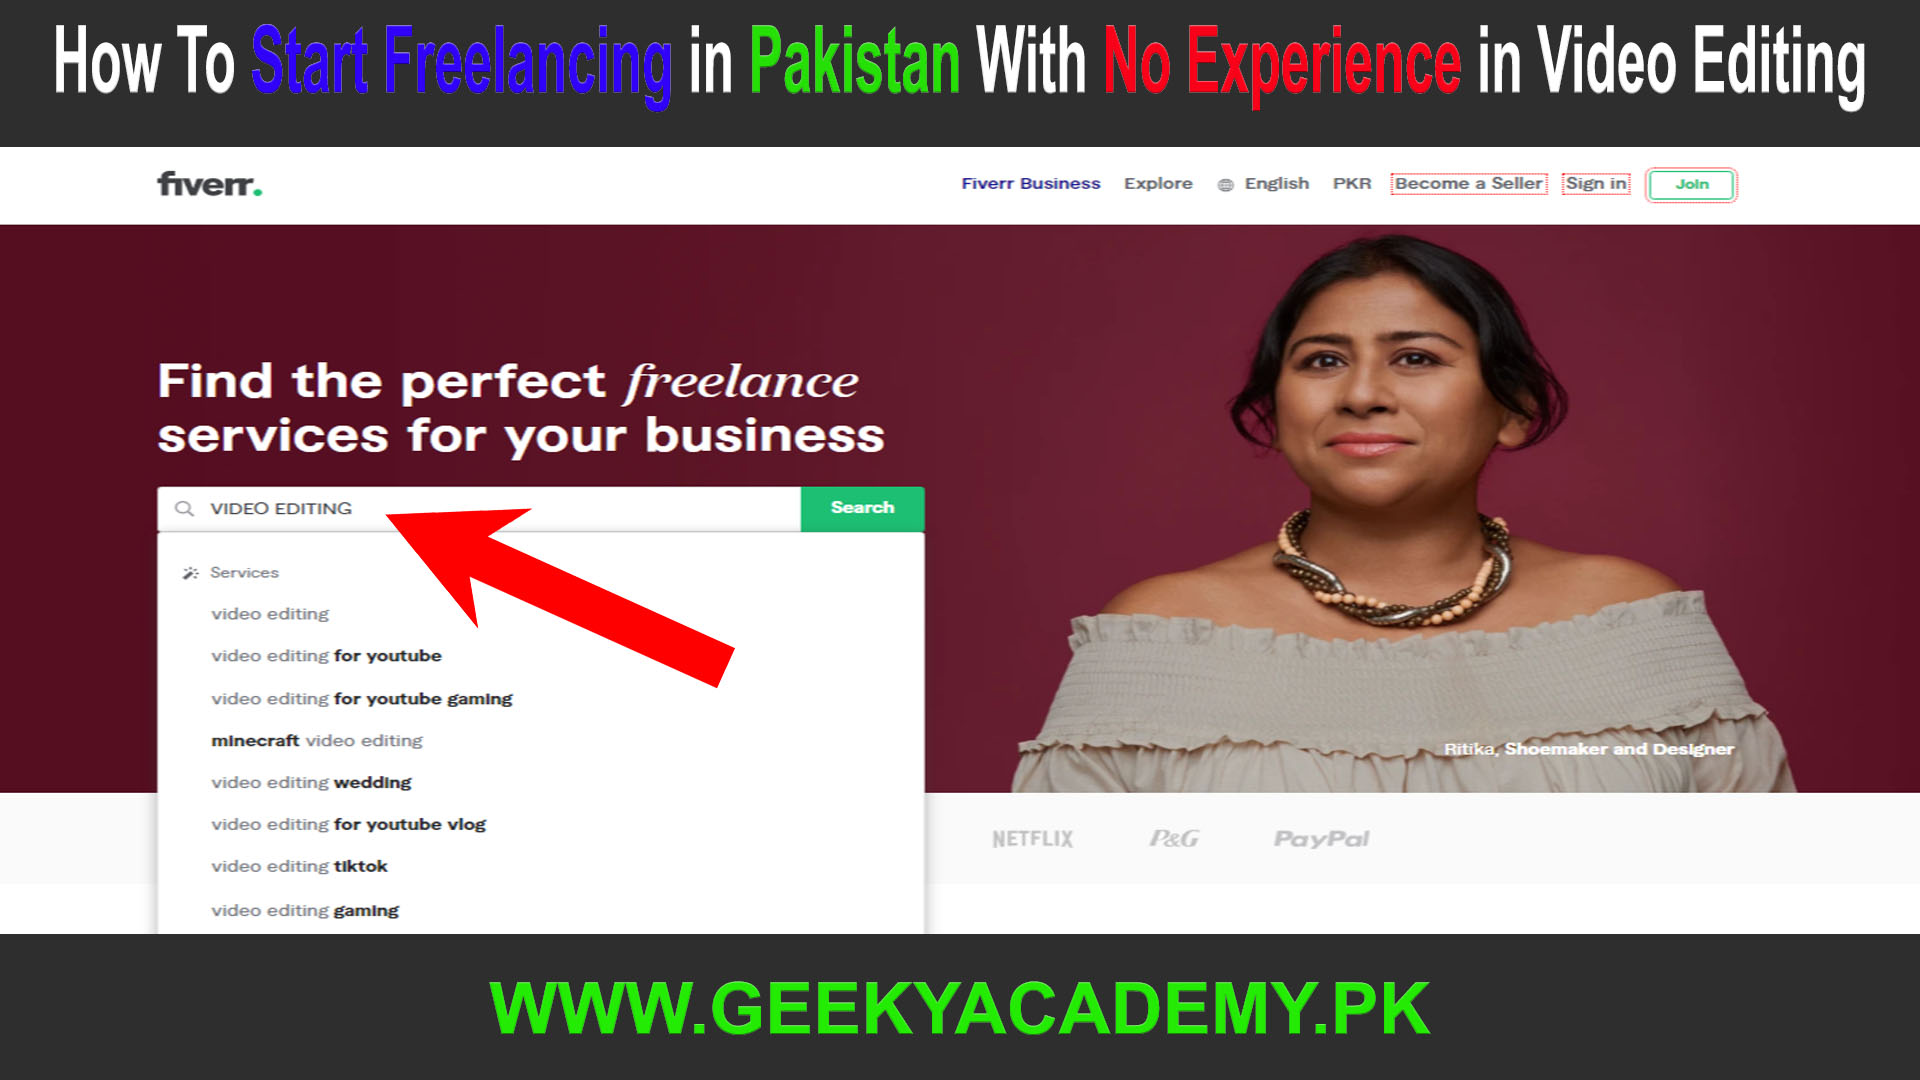 How To Start Freelancing in Pakistan With No Experience in Video Editing, Fiverr